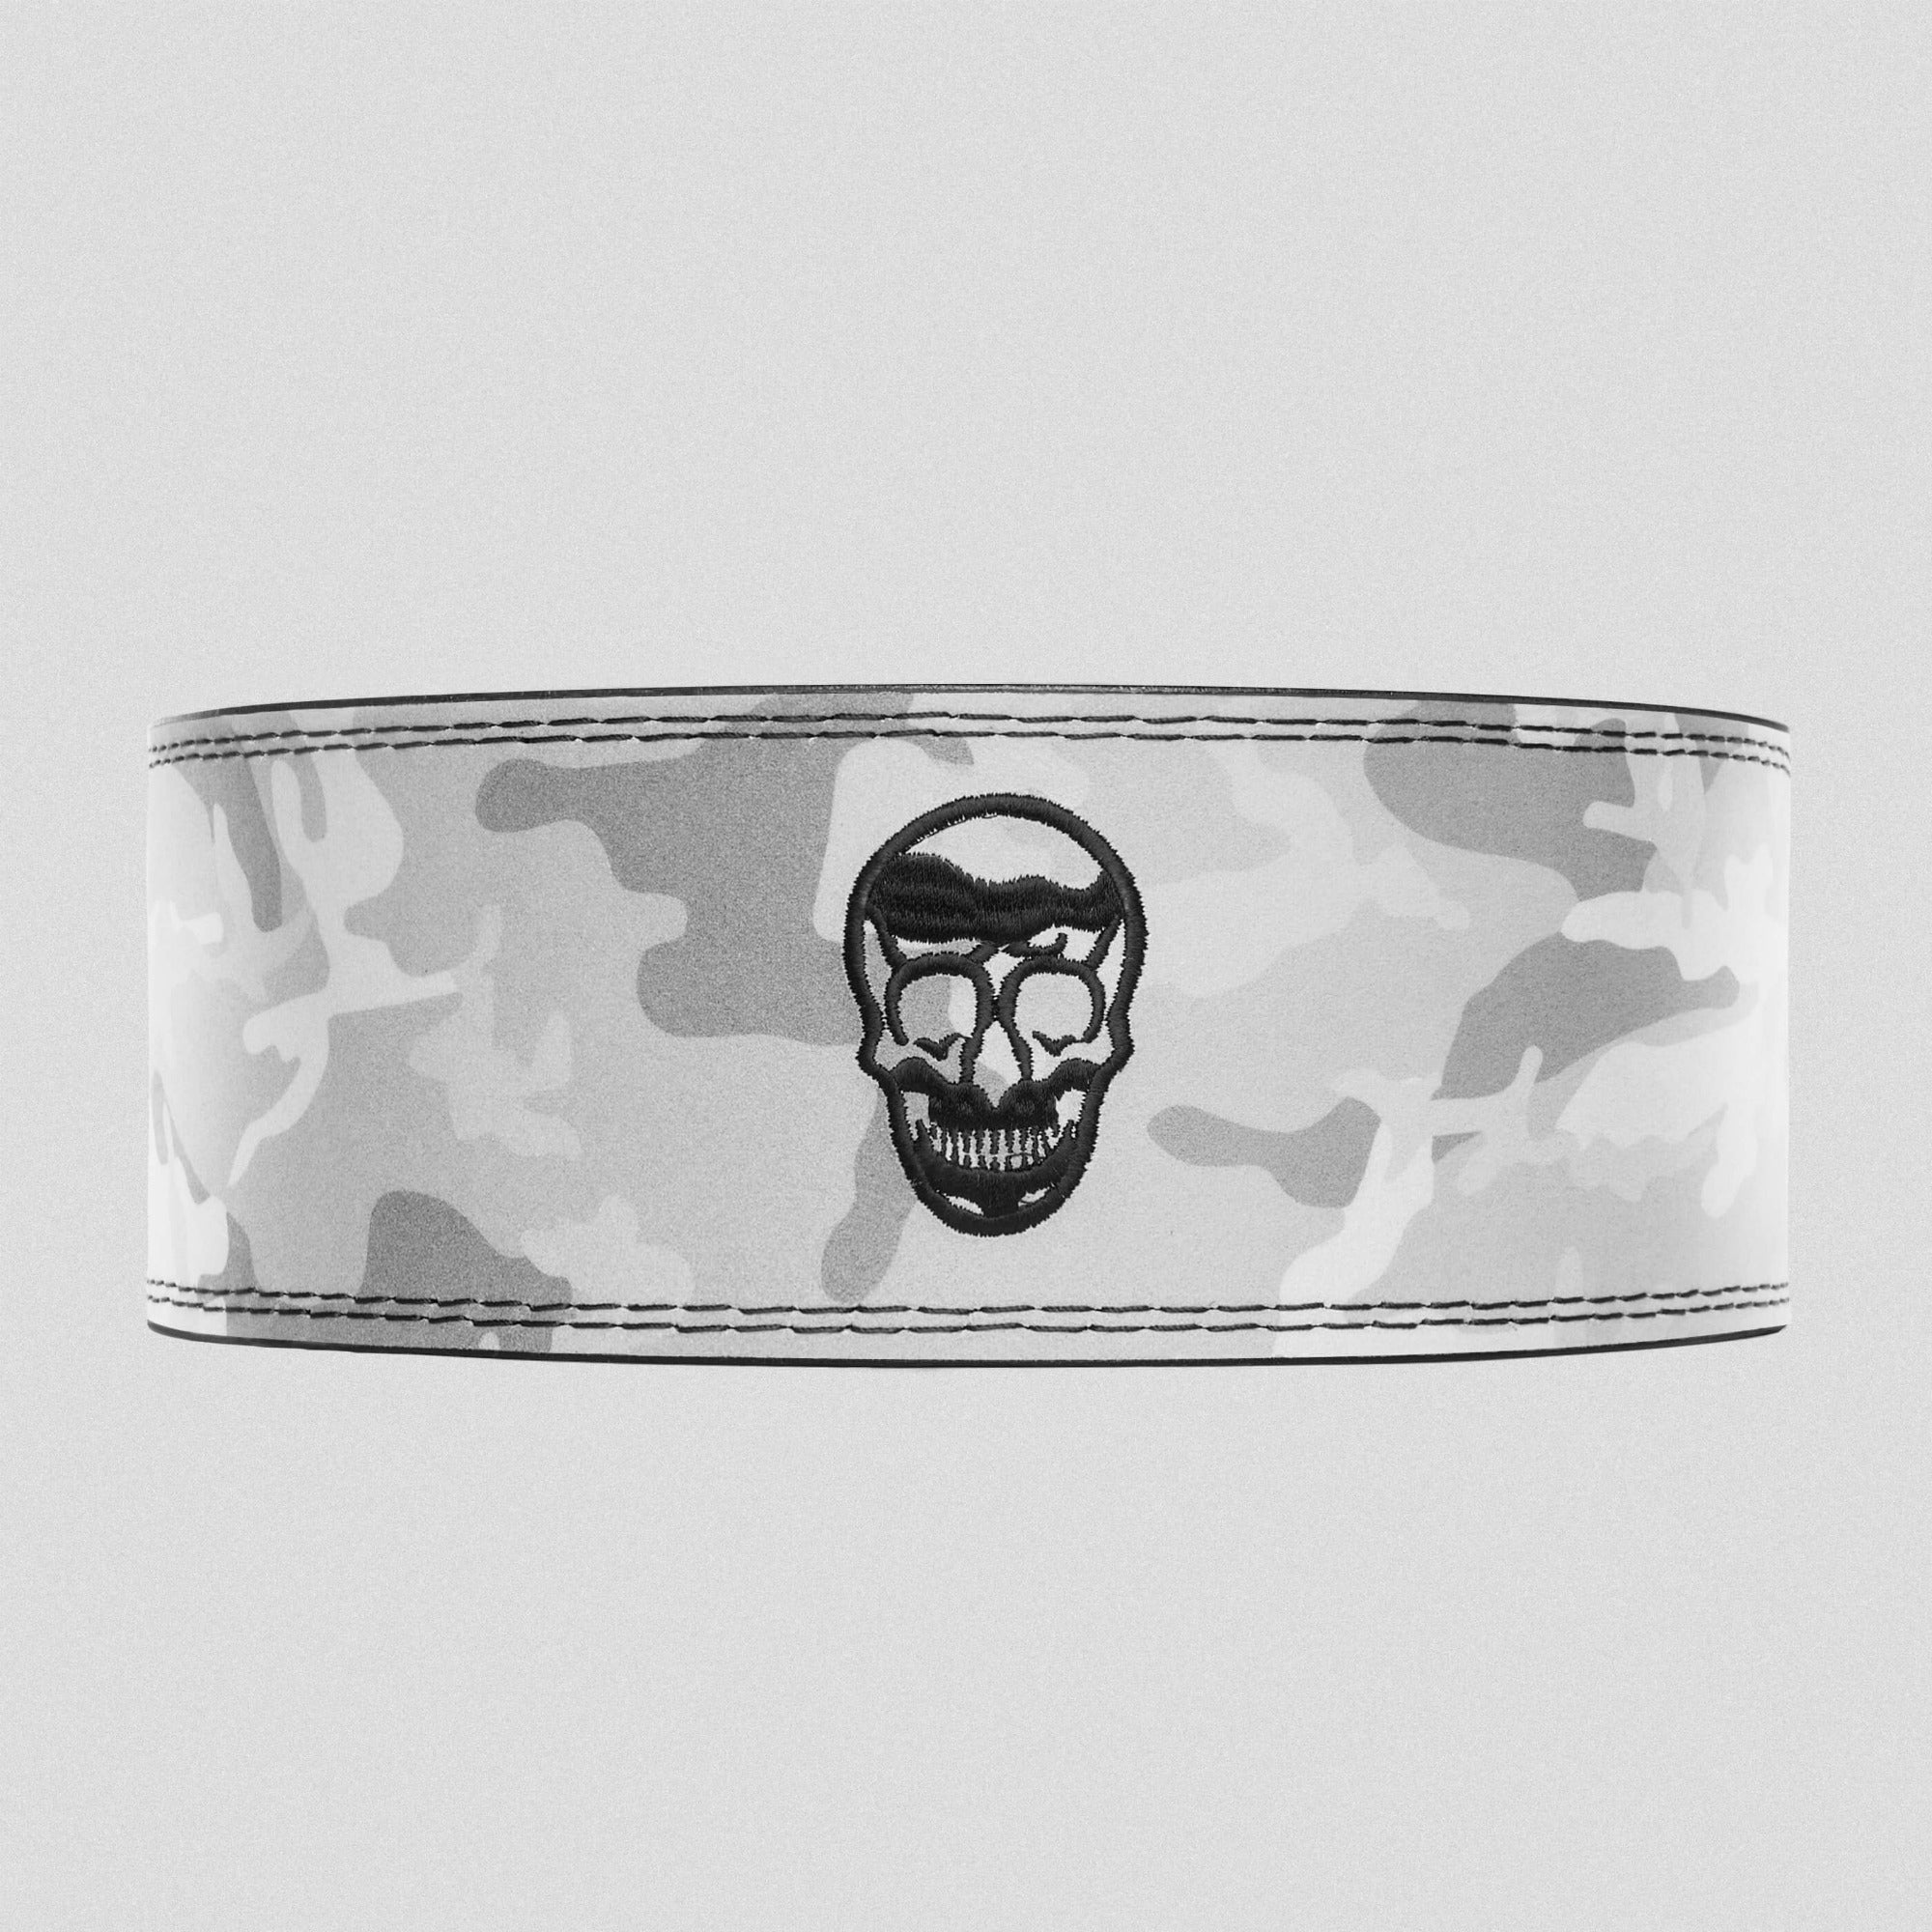 10MM Single Prong Weightlifting Belt - White Camo